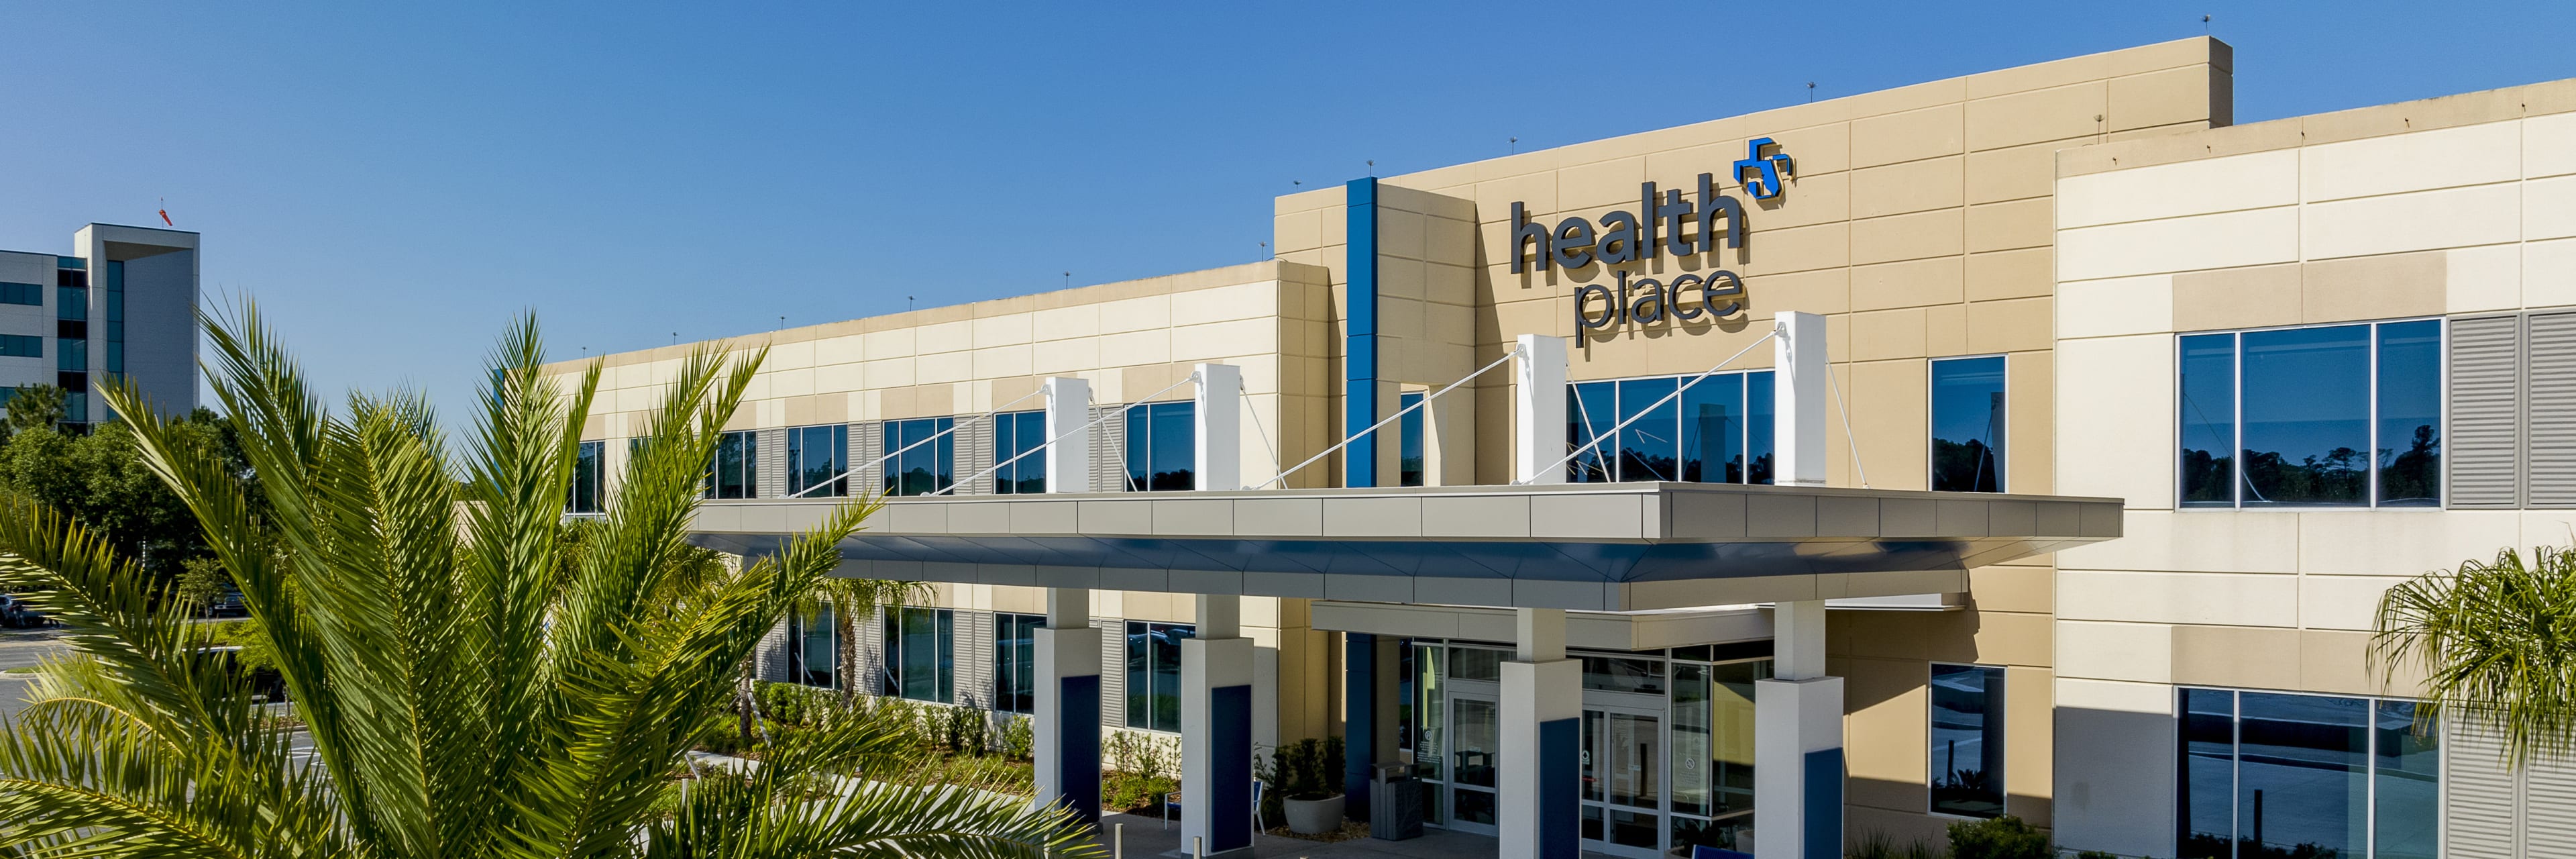 exterior of Healthplace Fleming